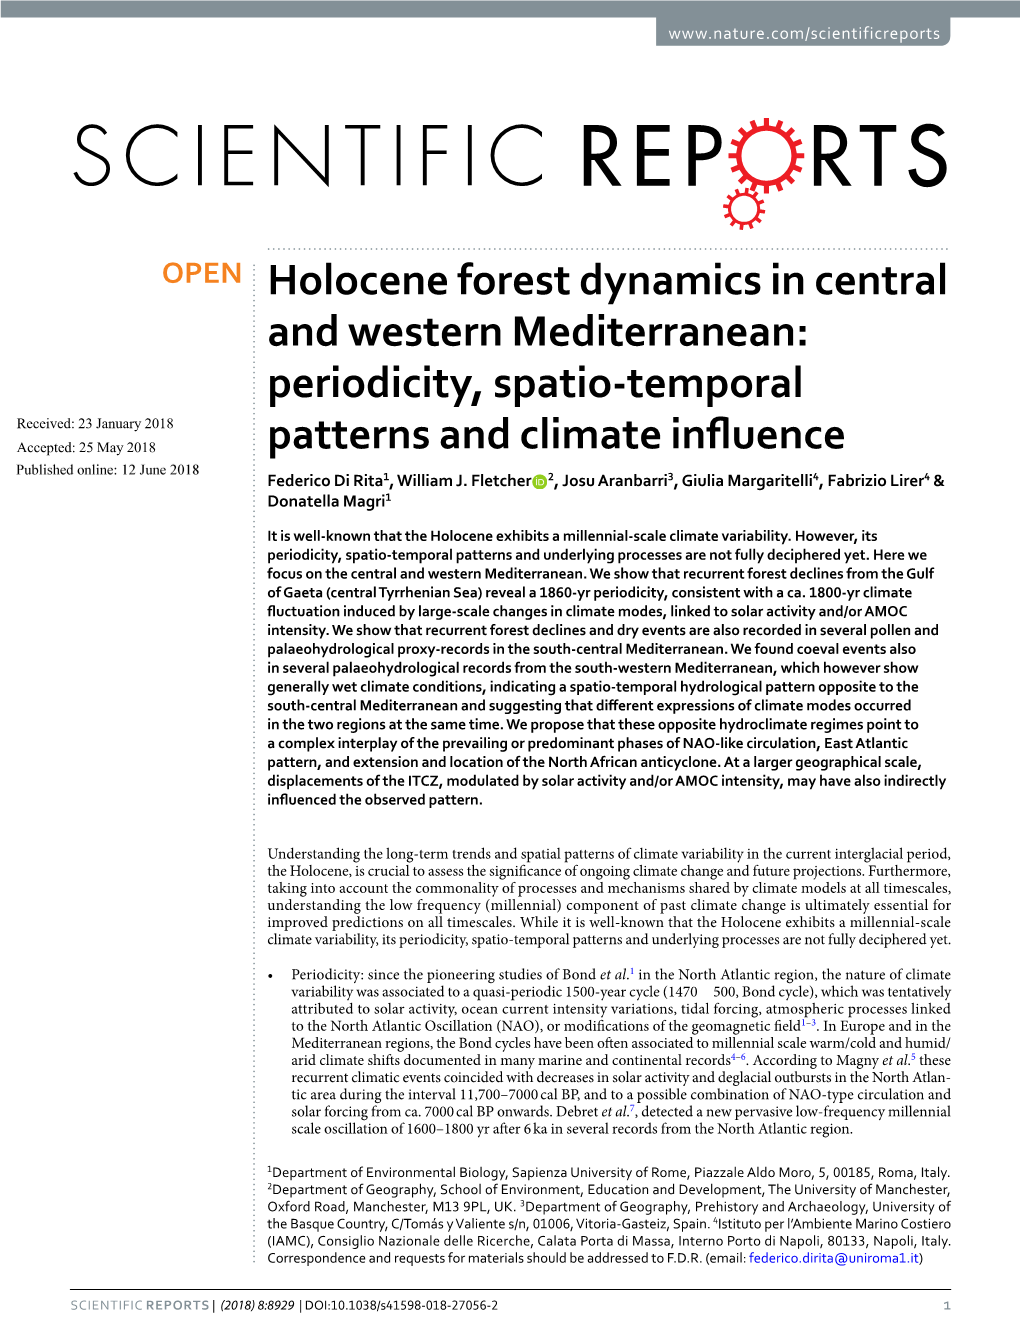 Holocene Forest Dynamics in Central and Western Mediterranean